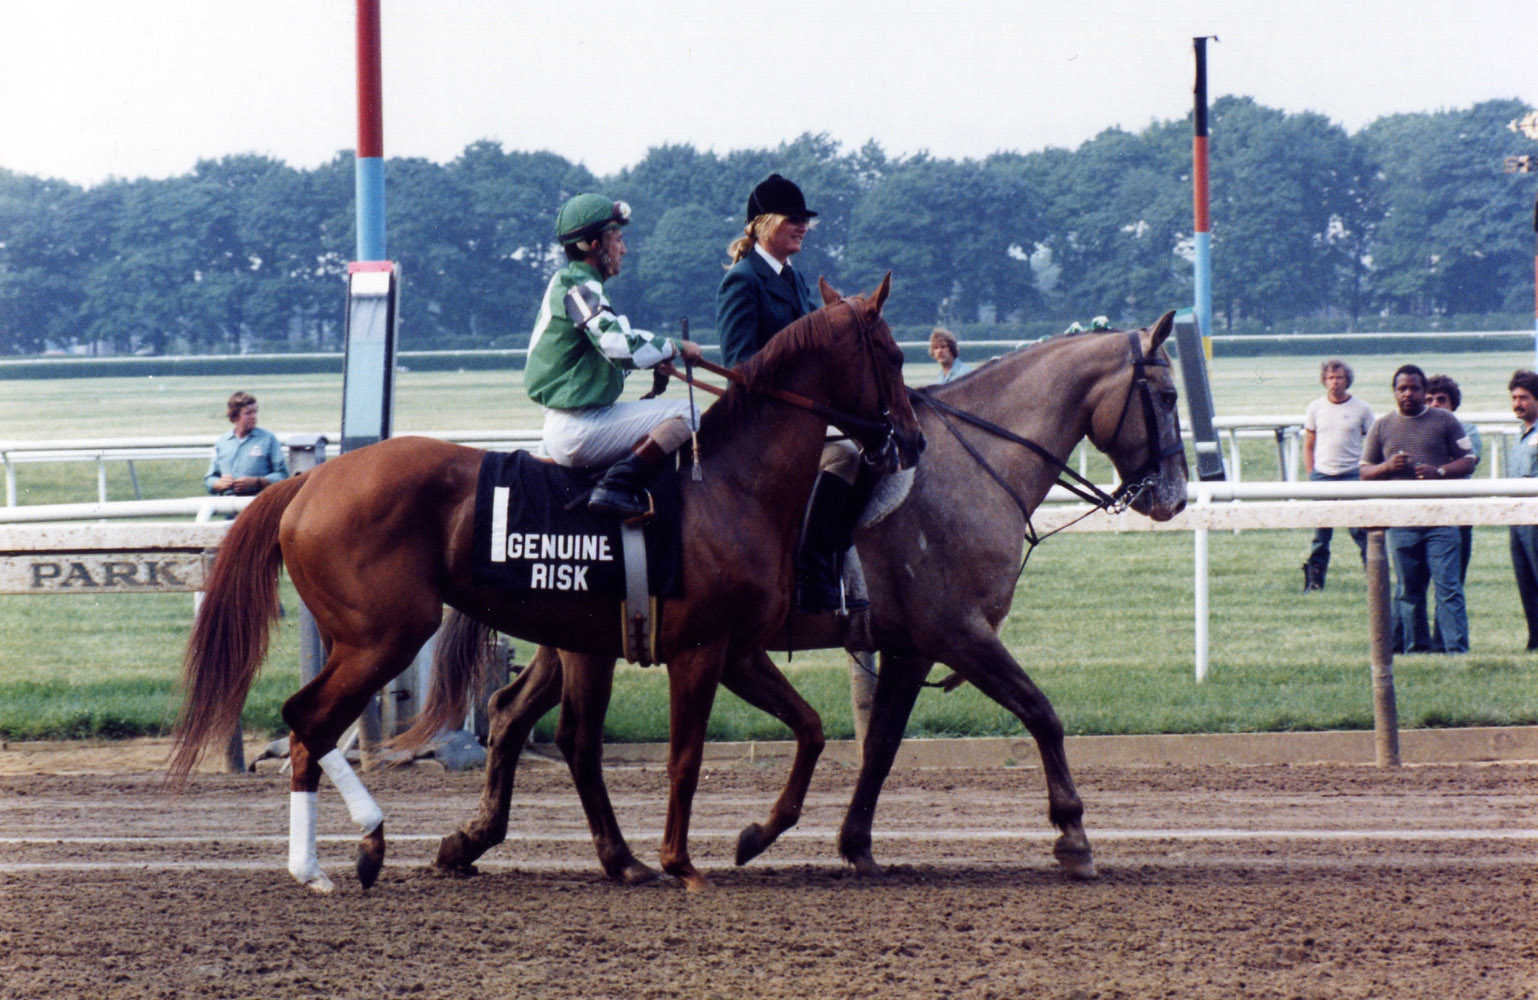 Genuine Risk (Jacinto Vasquez up) in the post parade for the 1980 Belmont Stakes. Like the Preakness, she finishes in second place (Barbara D. Livingston/Museum Collection)